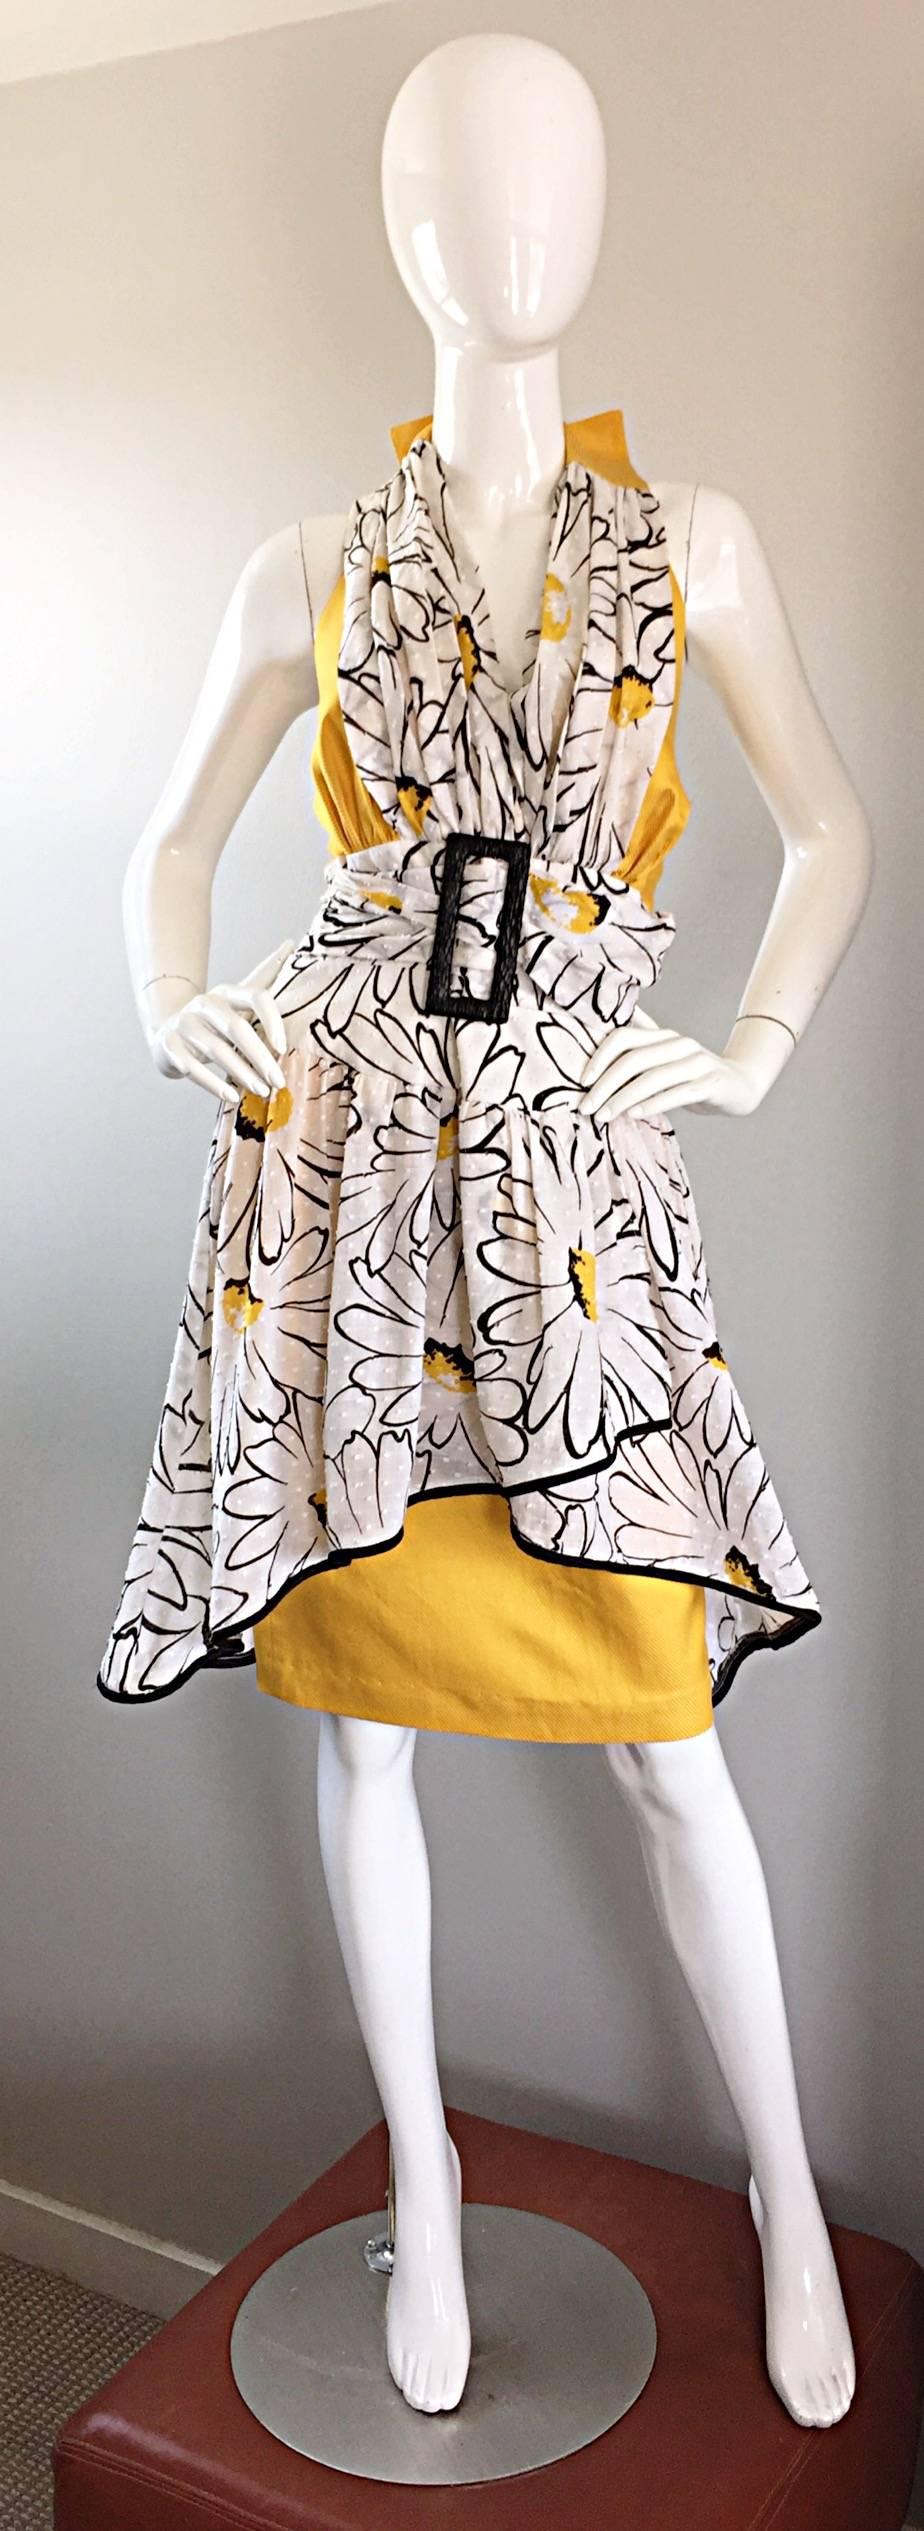 Beautiful vintage 1980s STEFANOS by STEPHAN CARAS Avant Garde halter dress! Caras pieces are very sought after and rare to come by! Features a wonderful print of op-art white daisies throughout. Yellow textured silk with a light cotton printed